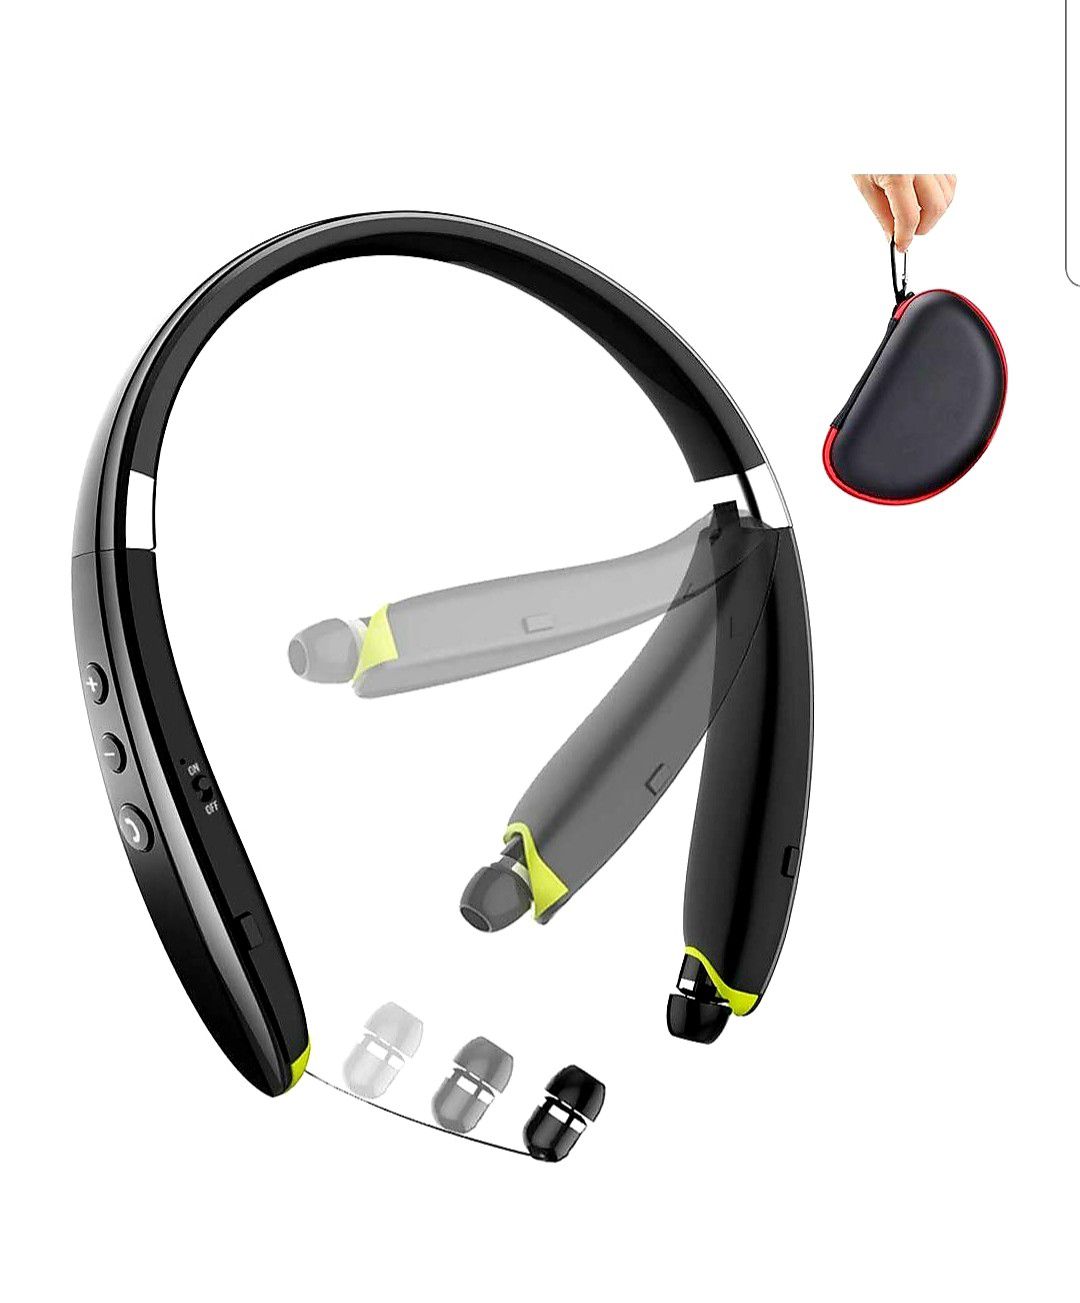 NEW! Foldable Wireless Neckband Headset with Retractable Earbuds